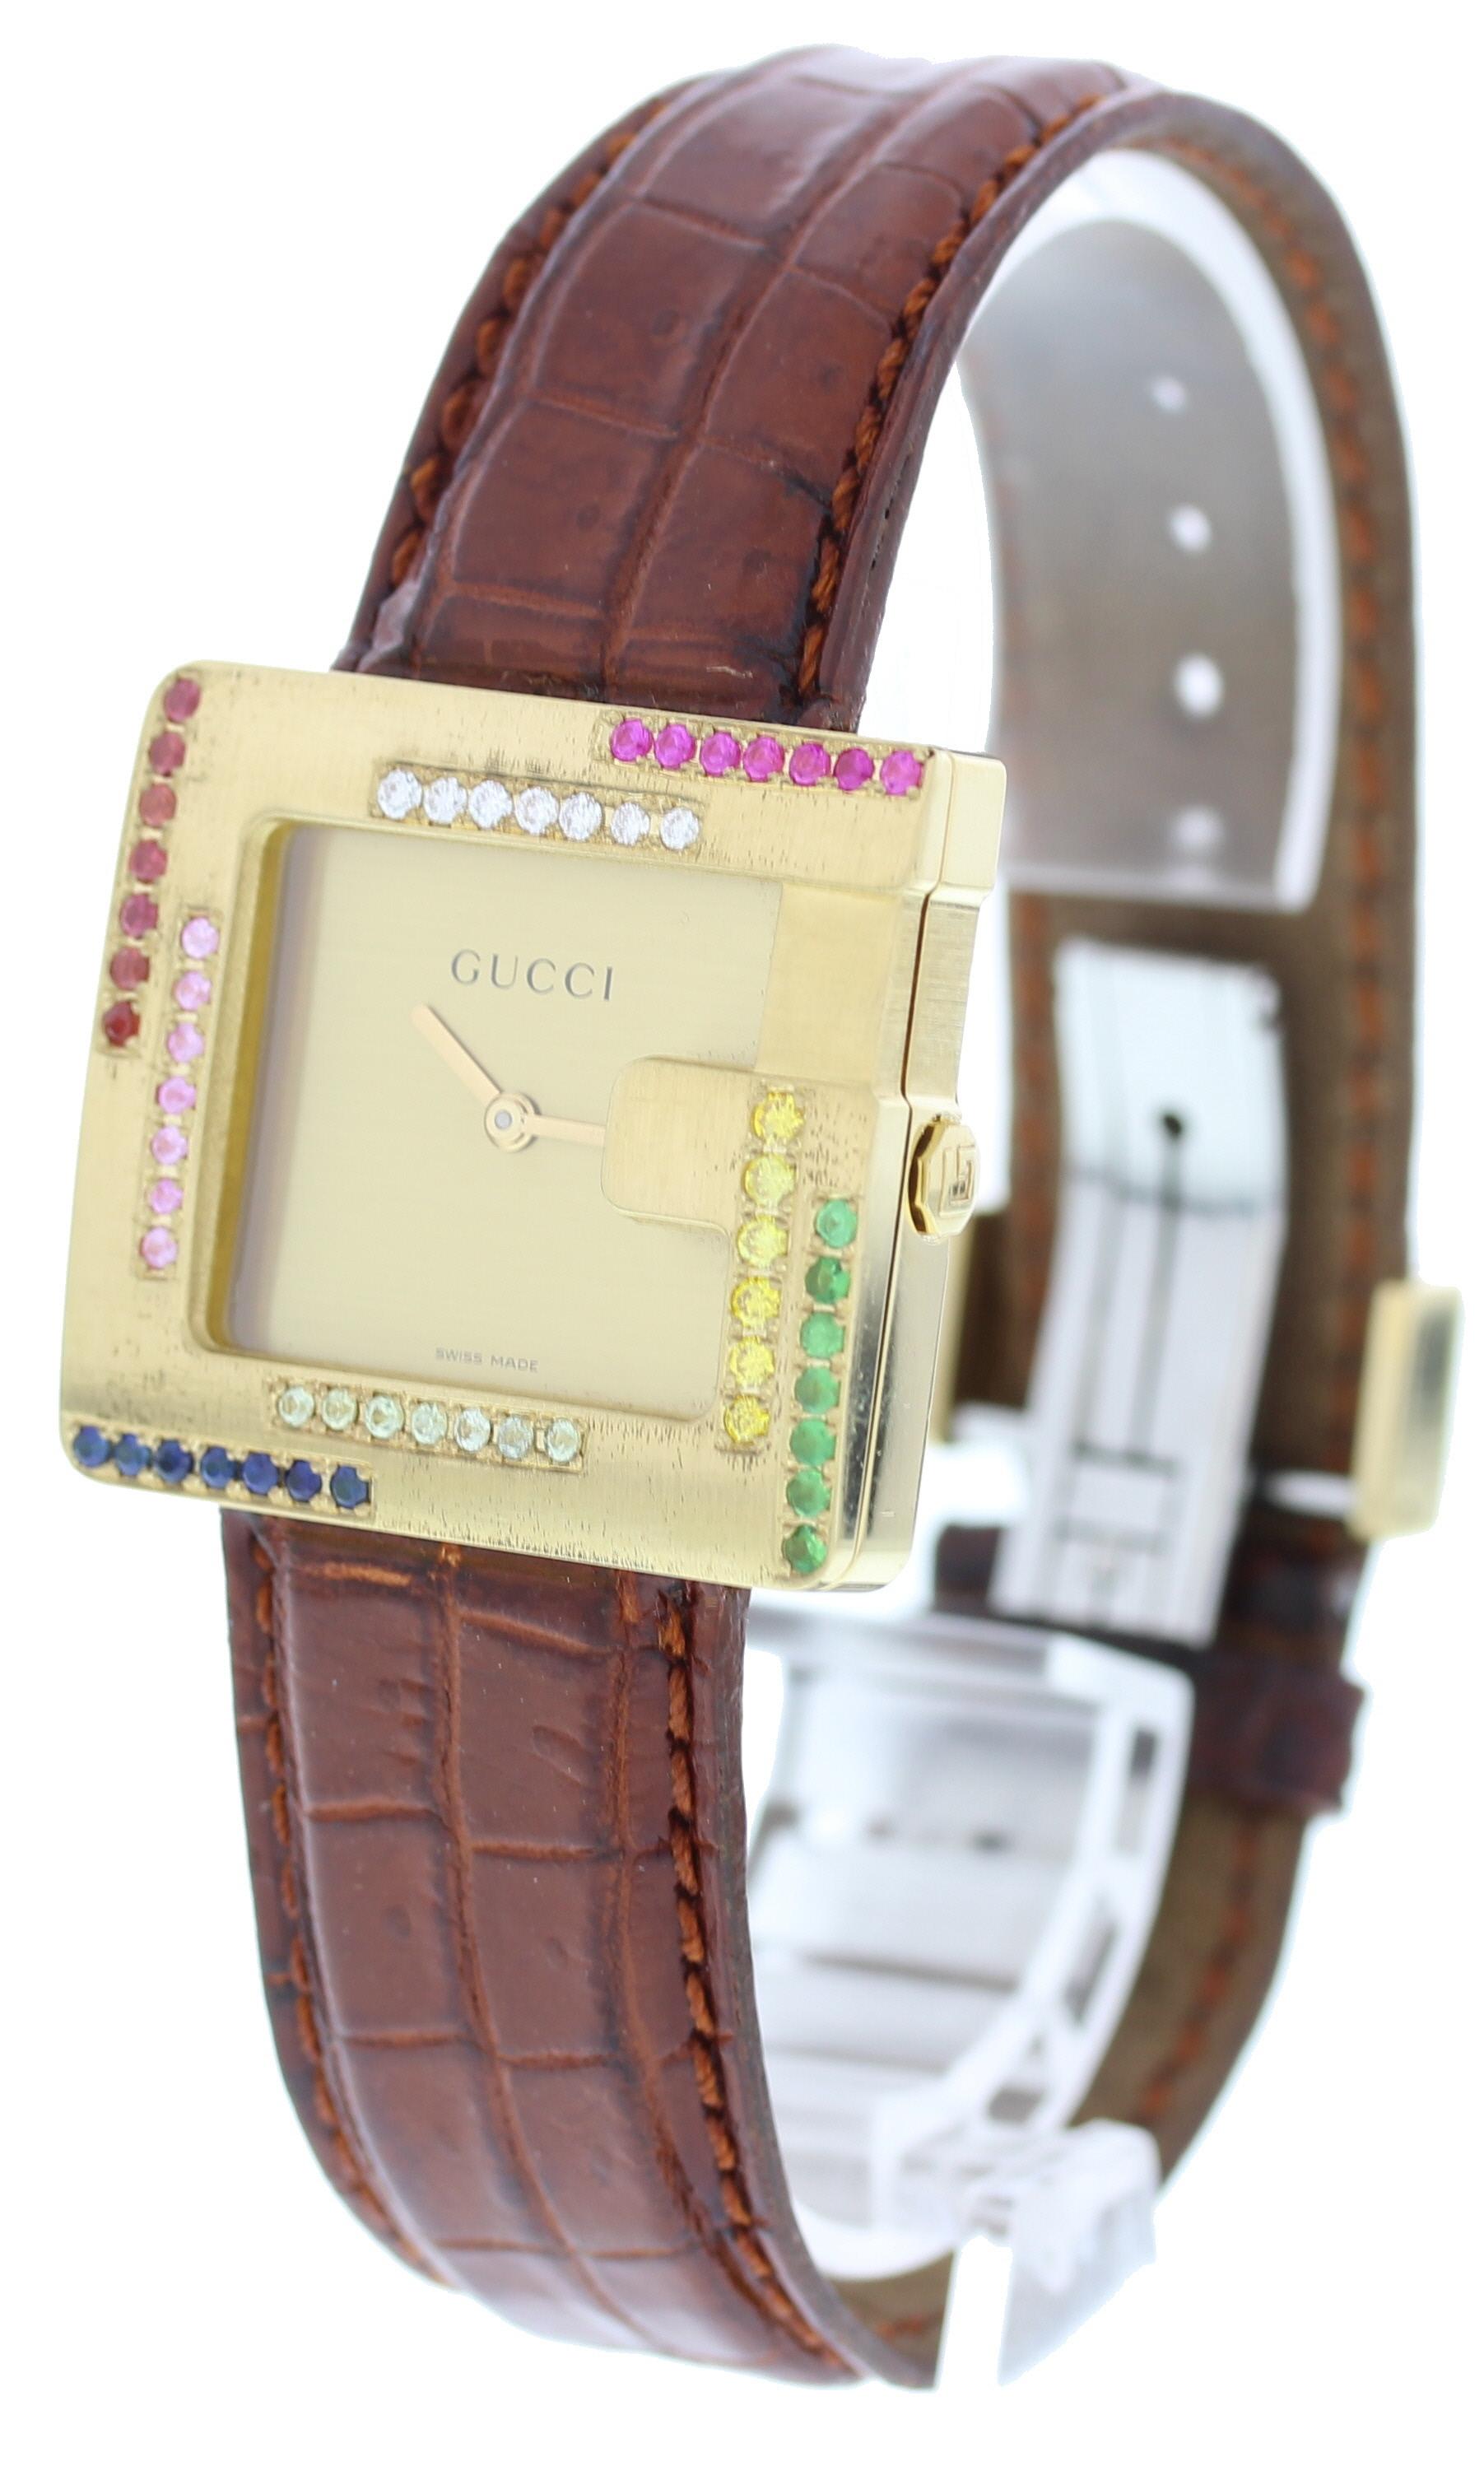 Gucci 3600M. 31mm 18k gold case with custom set Diamonds and gems on bezel. Dark brown leather strap with hidden butterfly clasp. Water resistant. Sapphire crystal glass. Quartz movement. 

